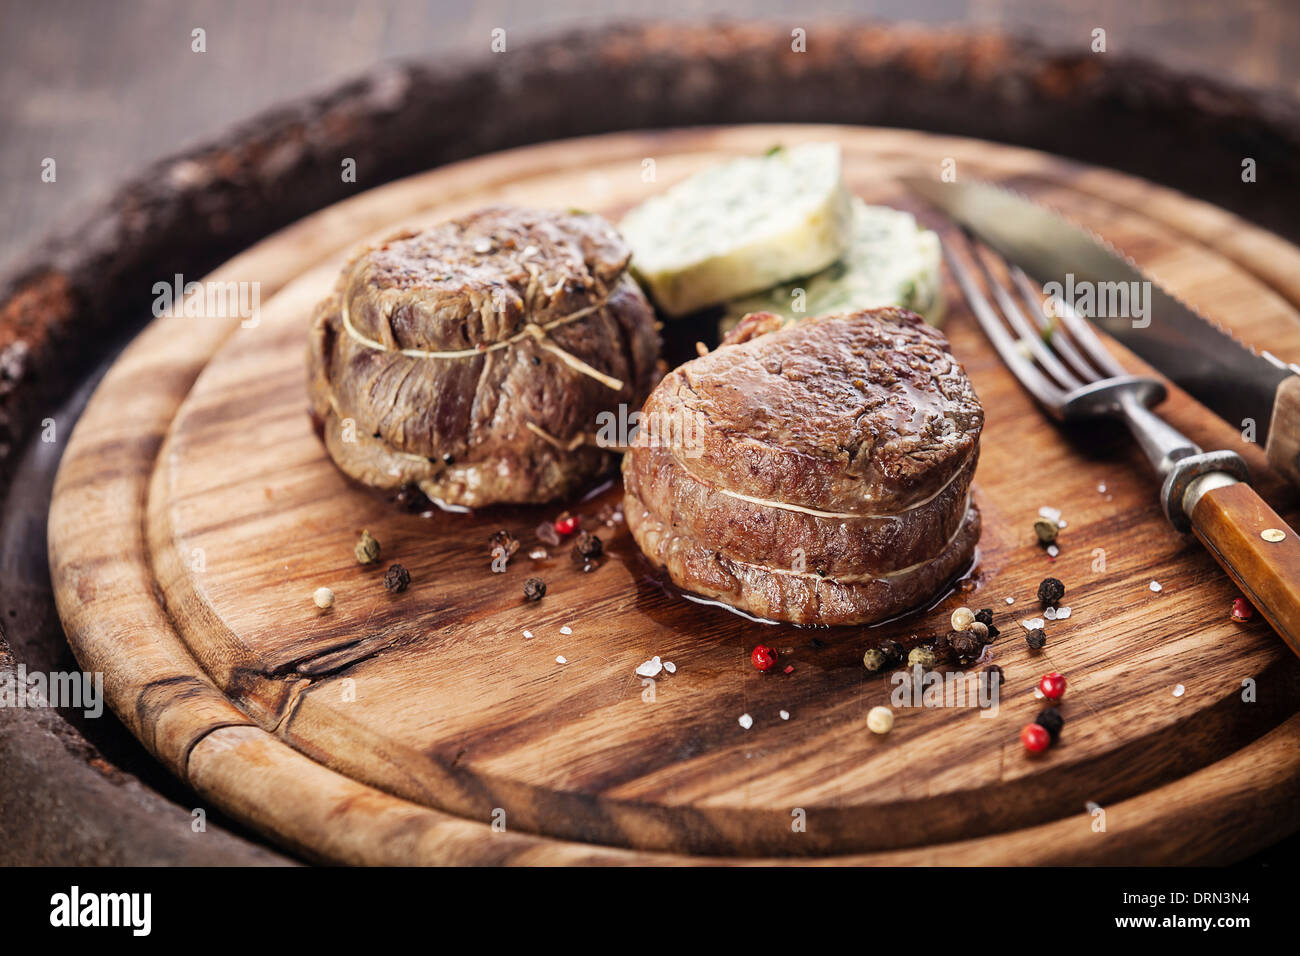 Beef steak fillet mignon and butter with herbs Stock Photo